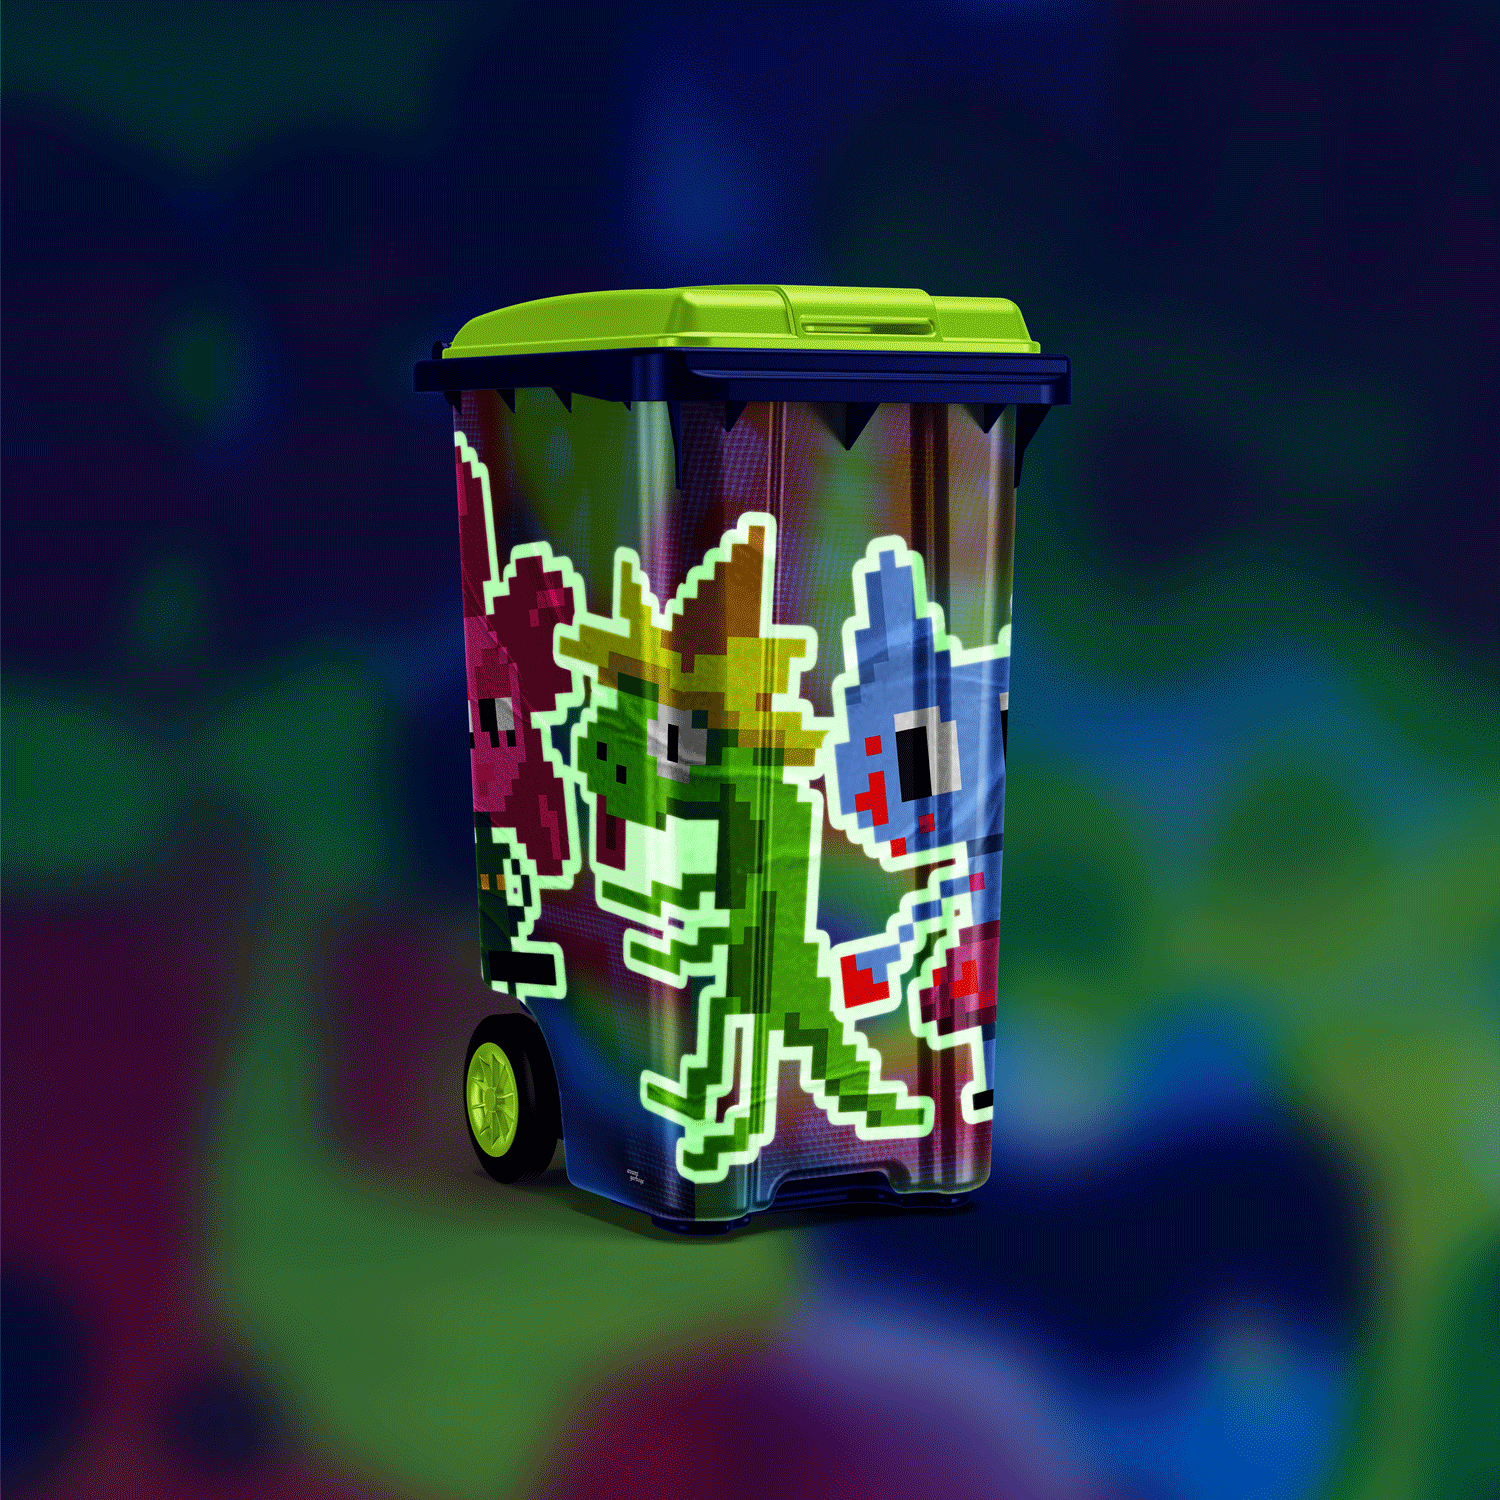 Mockup of garbage can with colourful wrap featuring three pixel art characters with glow in the dark outlines.